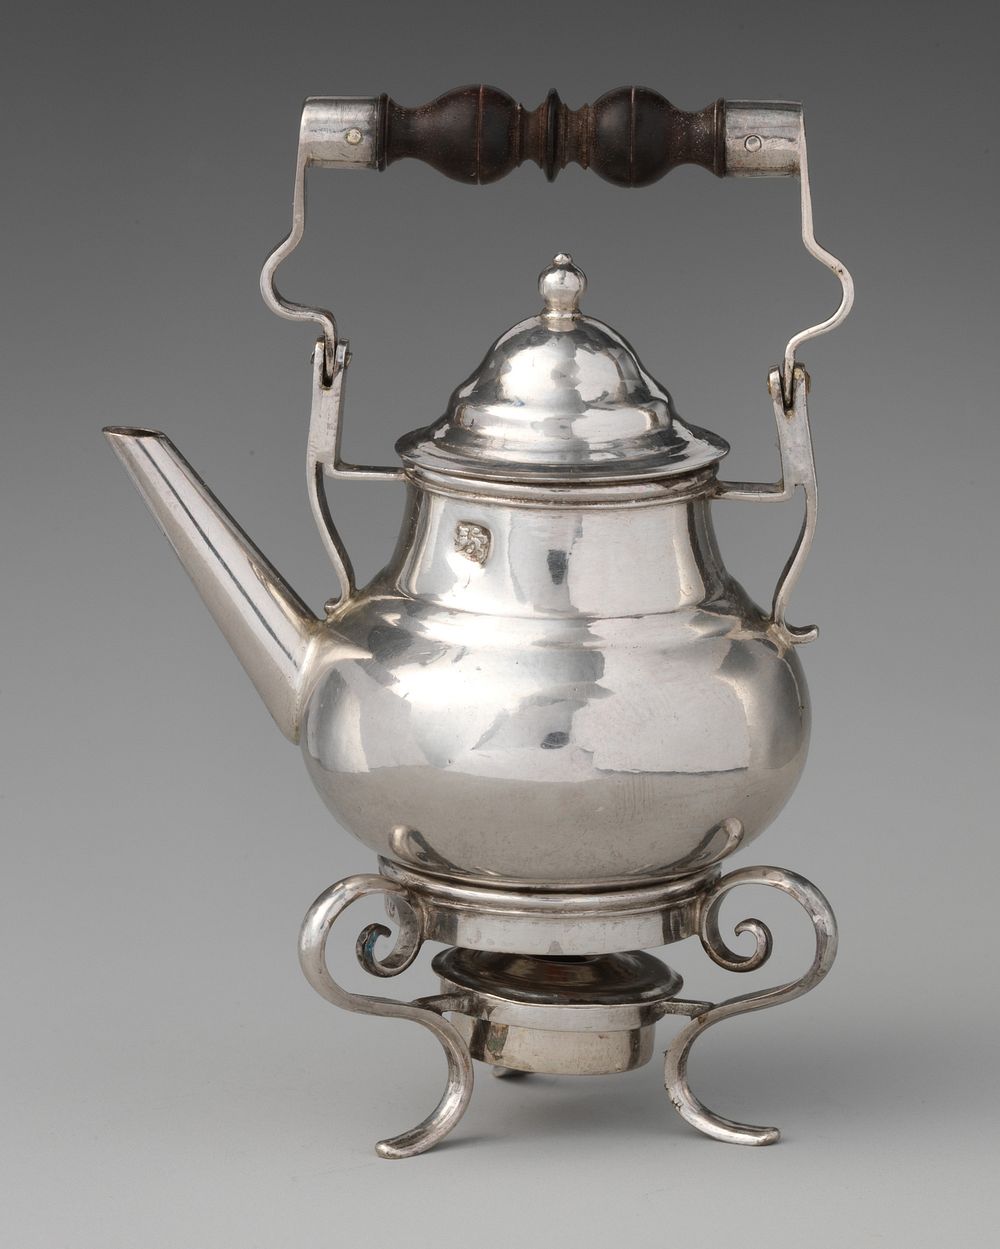 Miniature kettle with cover, stand, and lamp